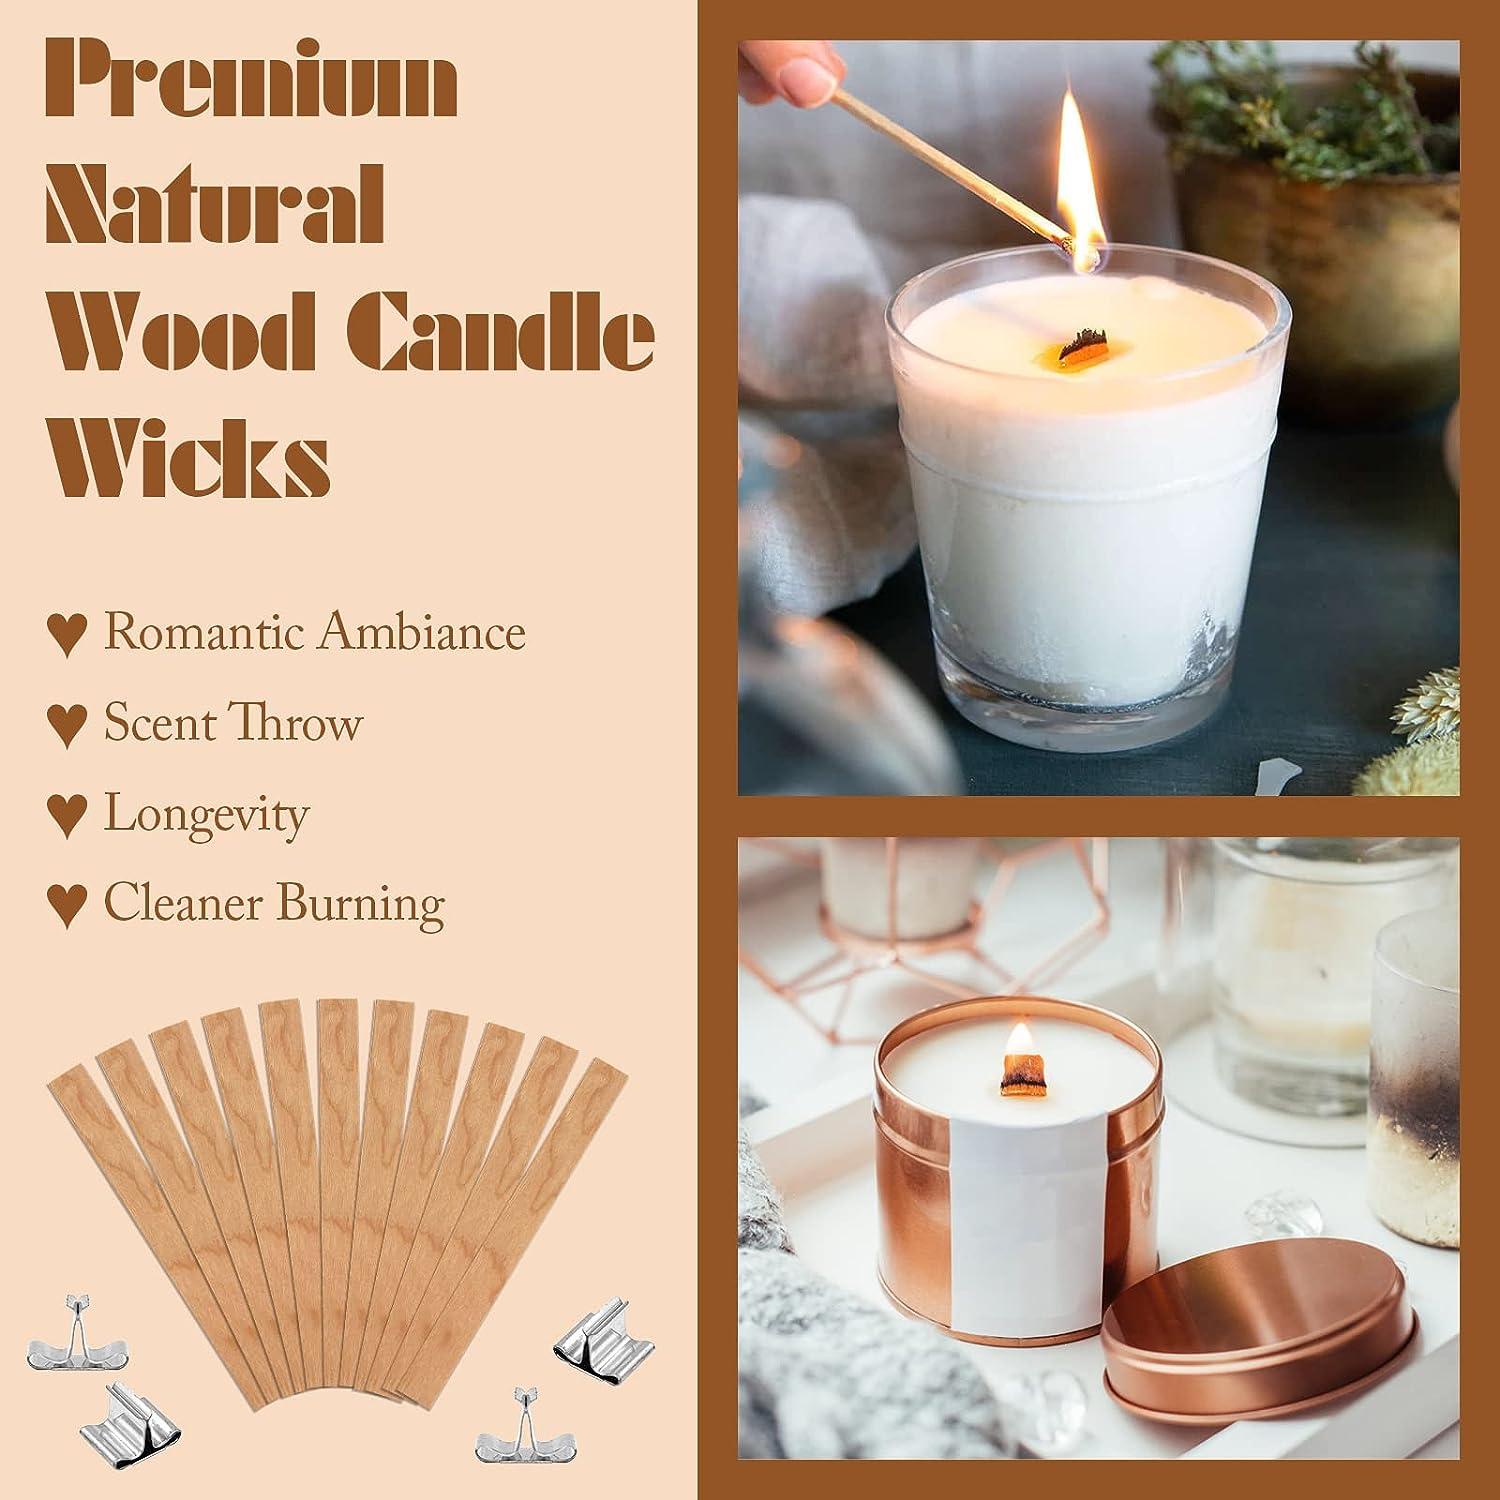 FVIEXE 200PCS Wood Candle Wicks, 5.1 X 0.5 Inch Wooden Wicks for